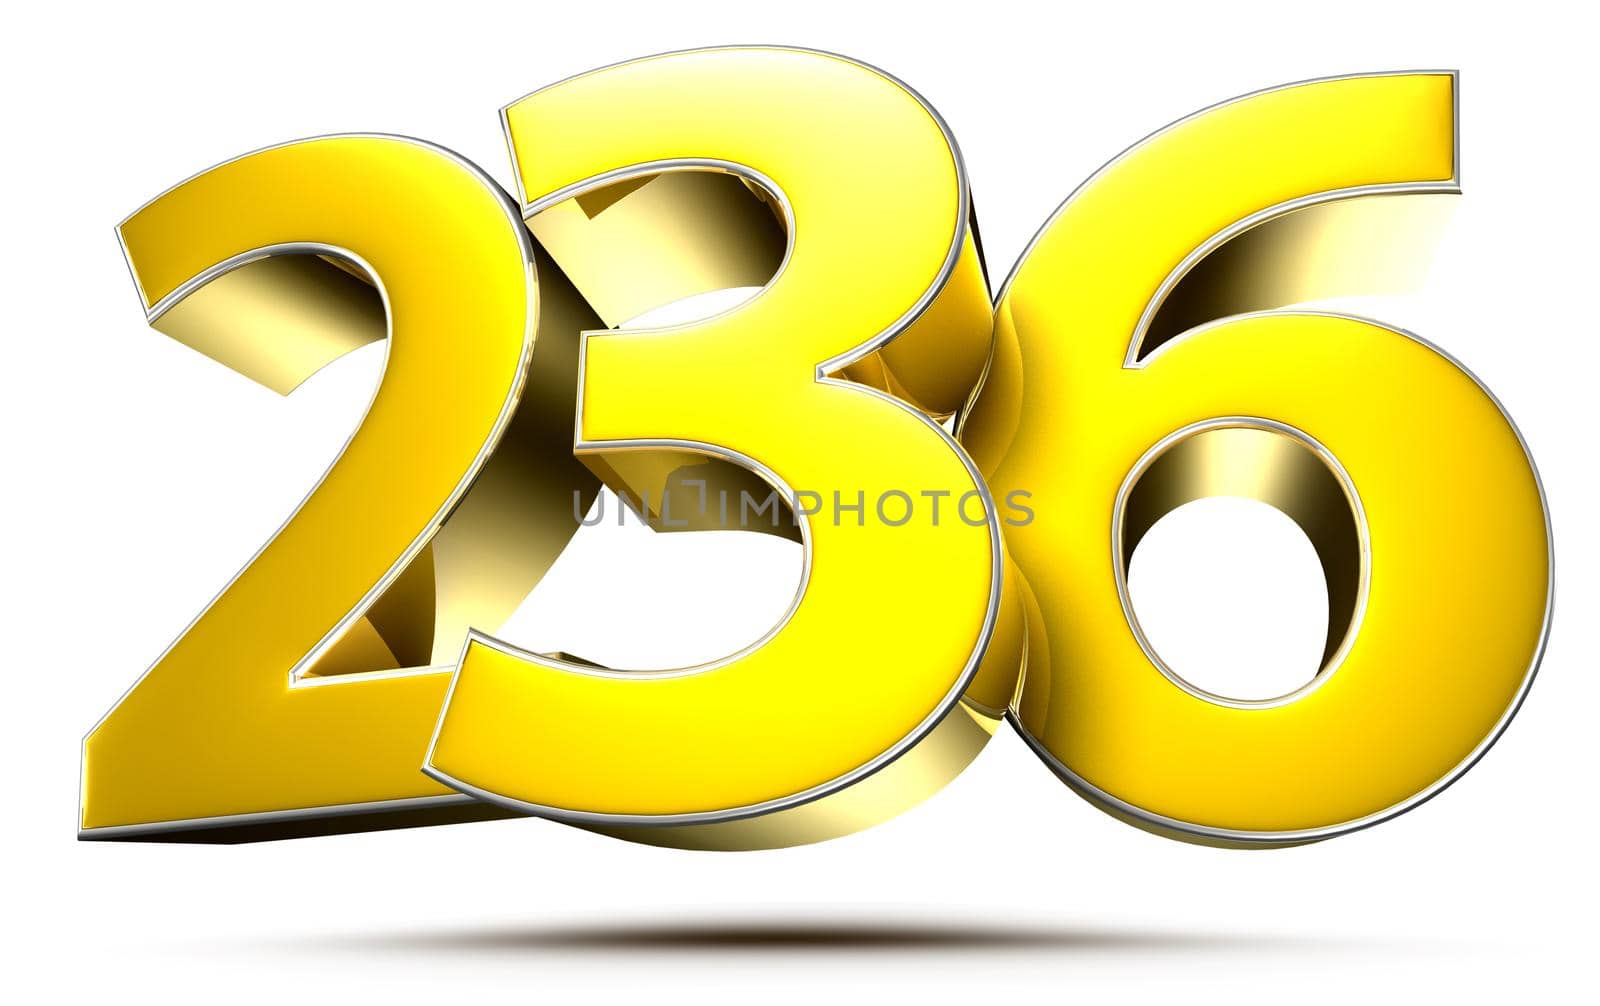 236 gold 3D illustration on white background with clipping path.